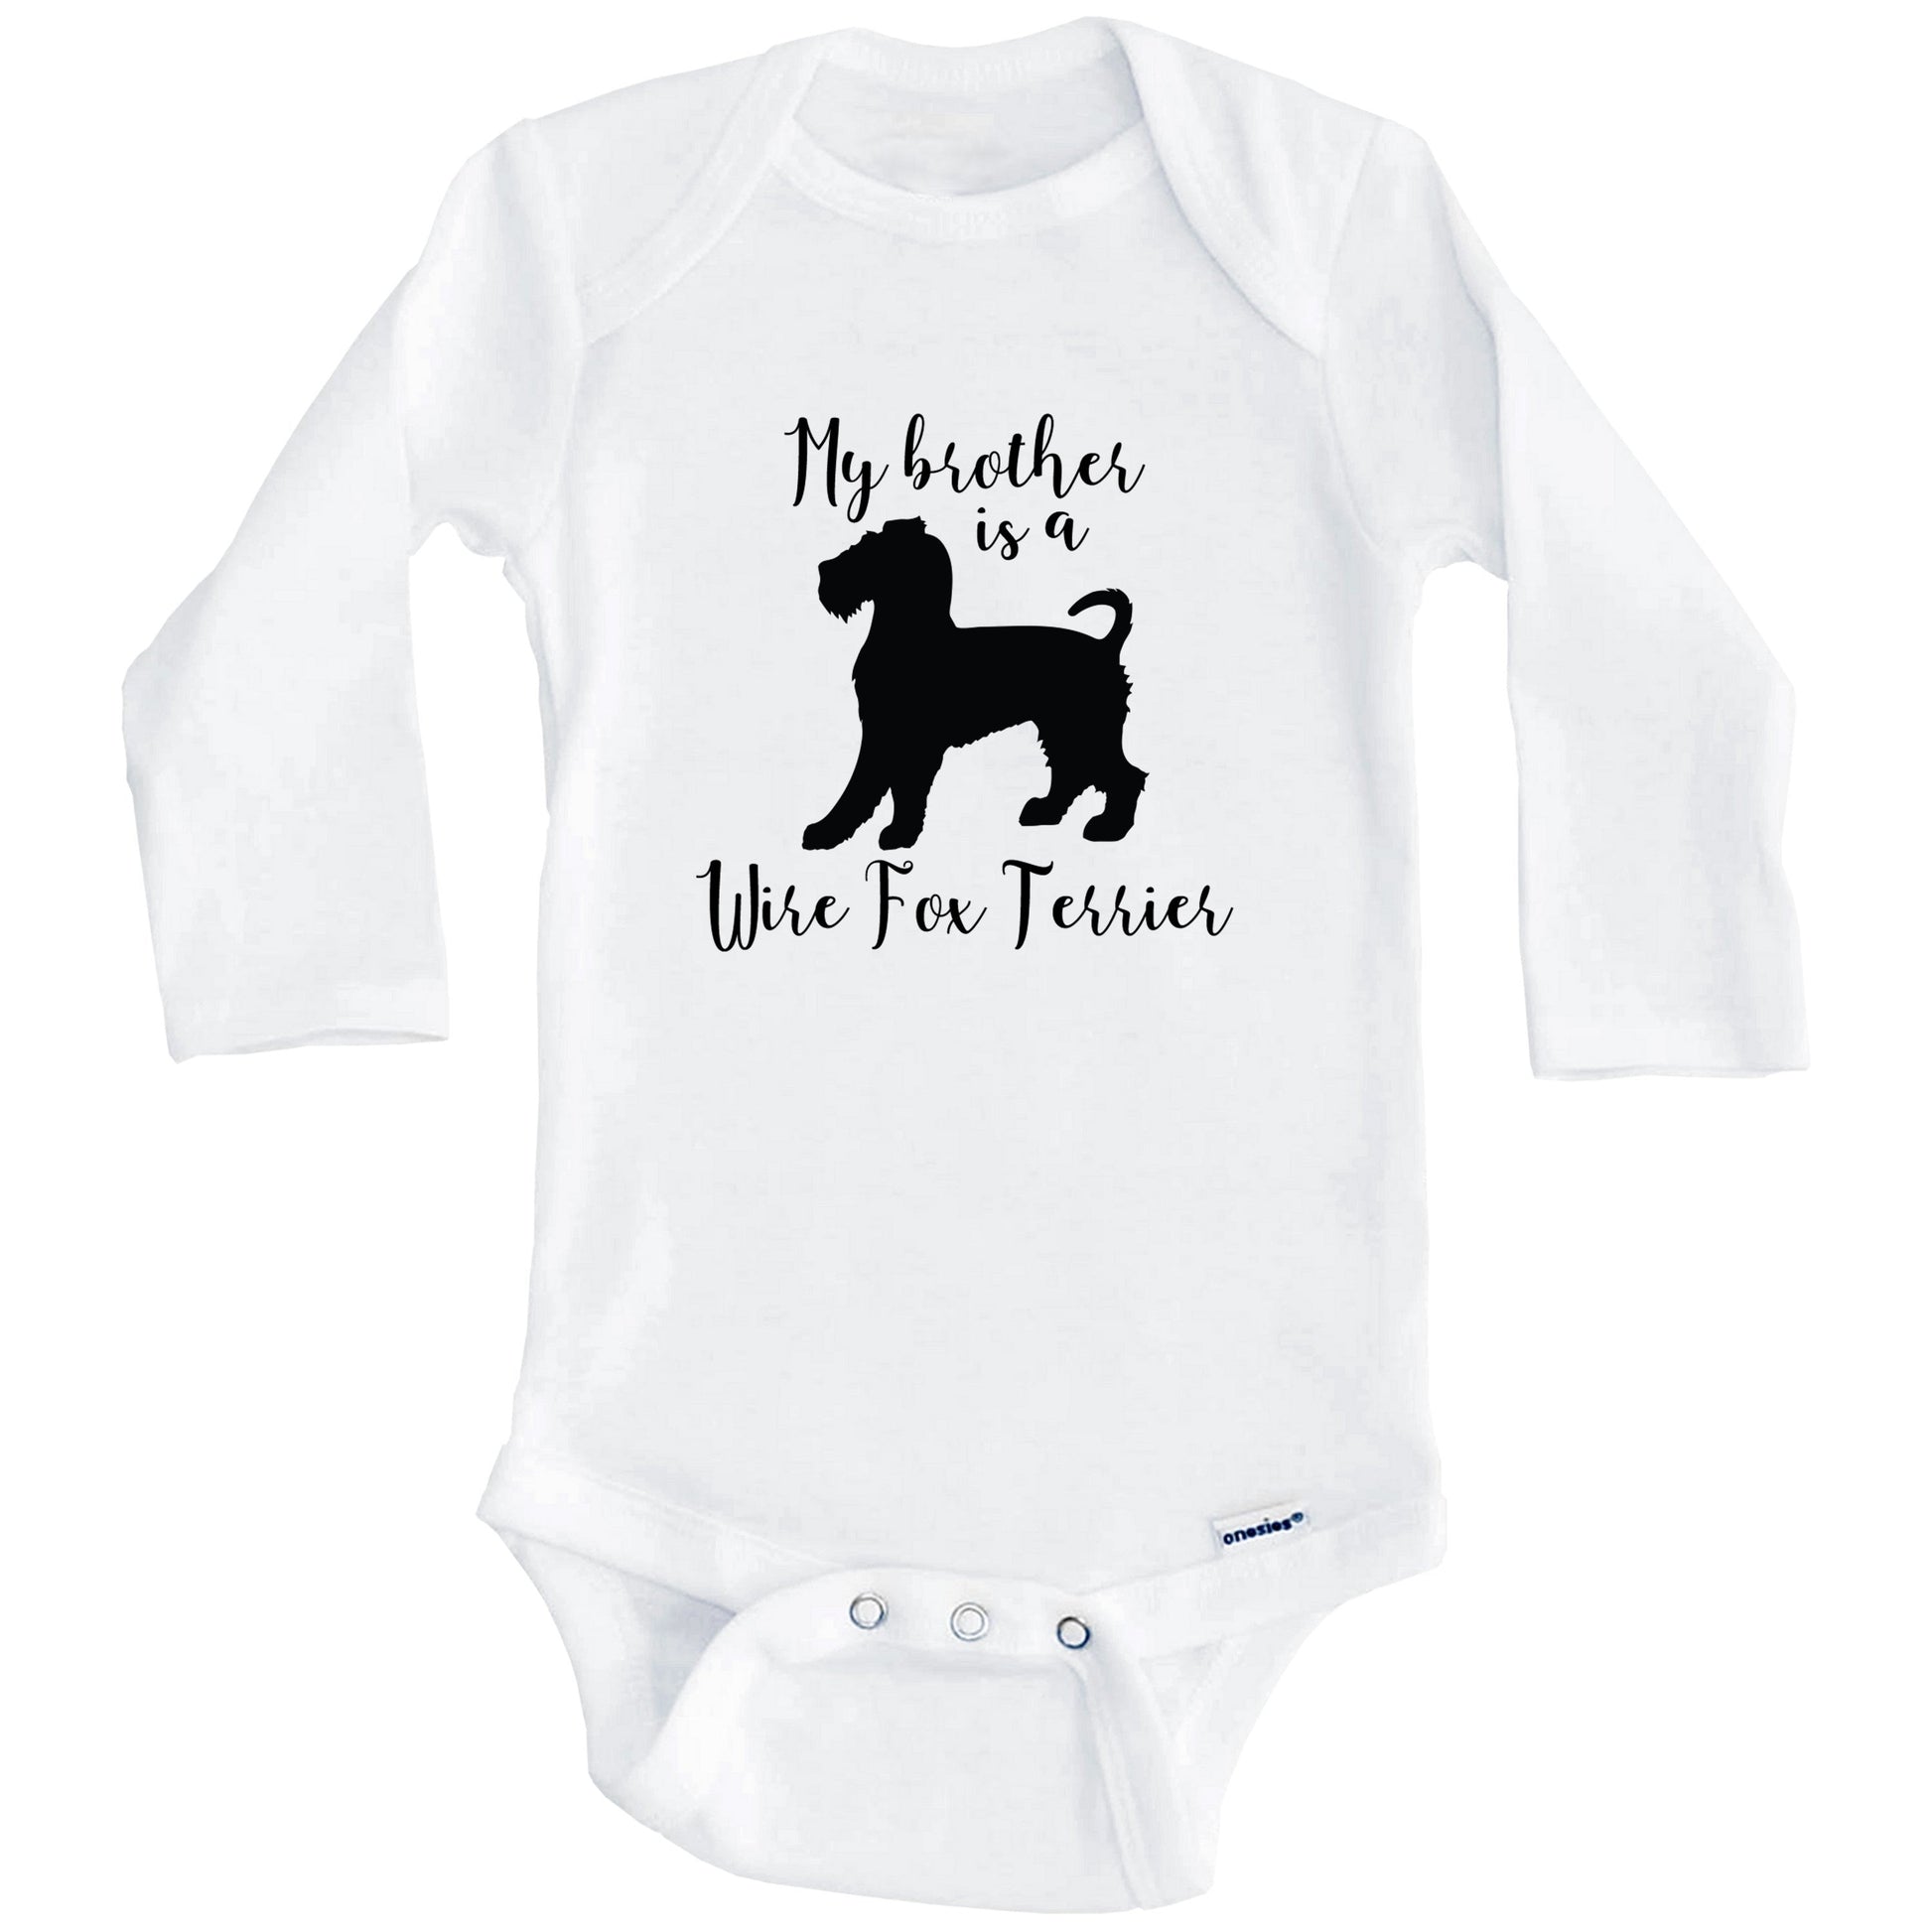 My Brother Is A Wire Fox Terrier Cute Dog Baby Onesie - Wire Fox Terrier One Piece Baby Bodysuit (Long Sleeves)